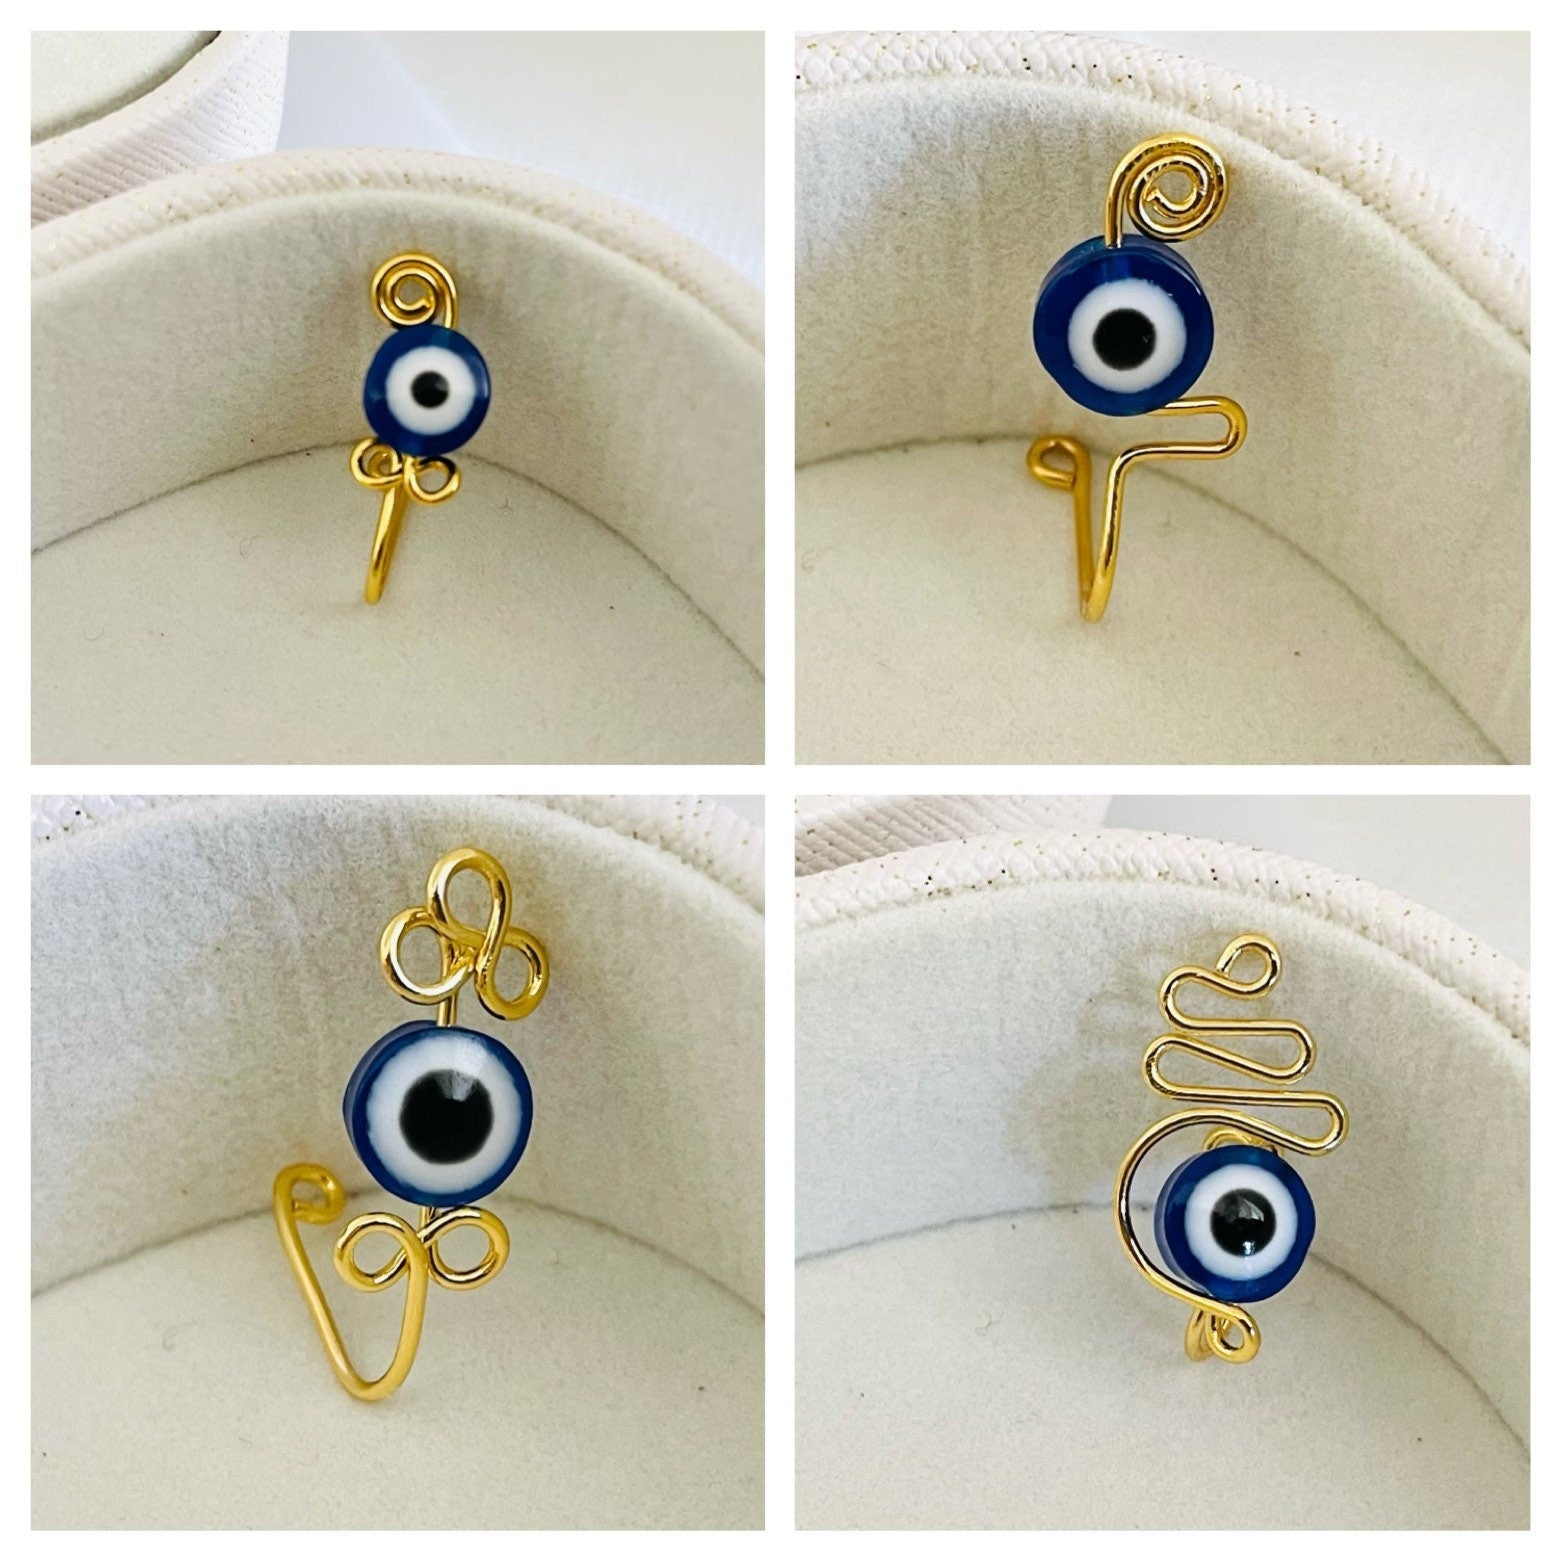 Nose Cuffs With Evil Eye - Fake Nose rings